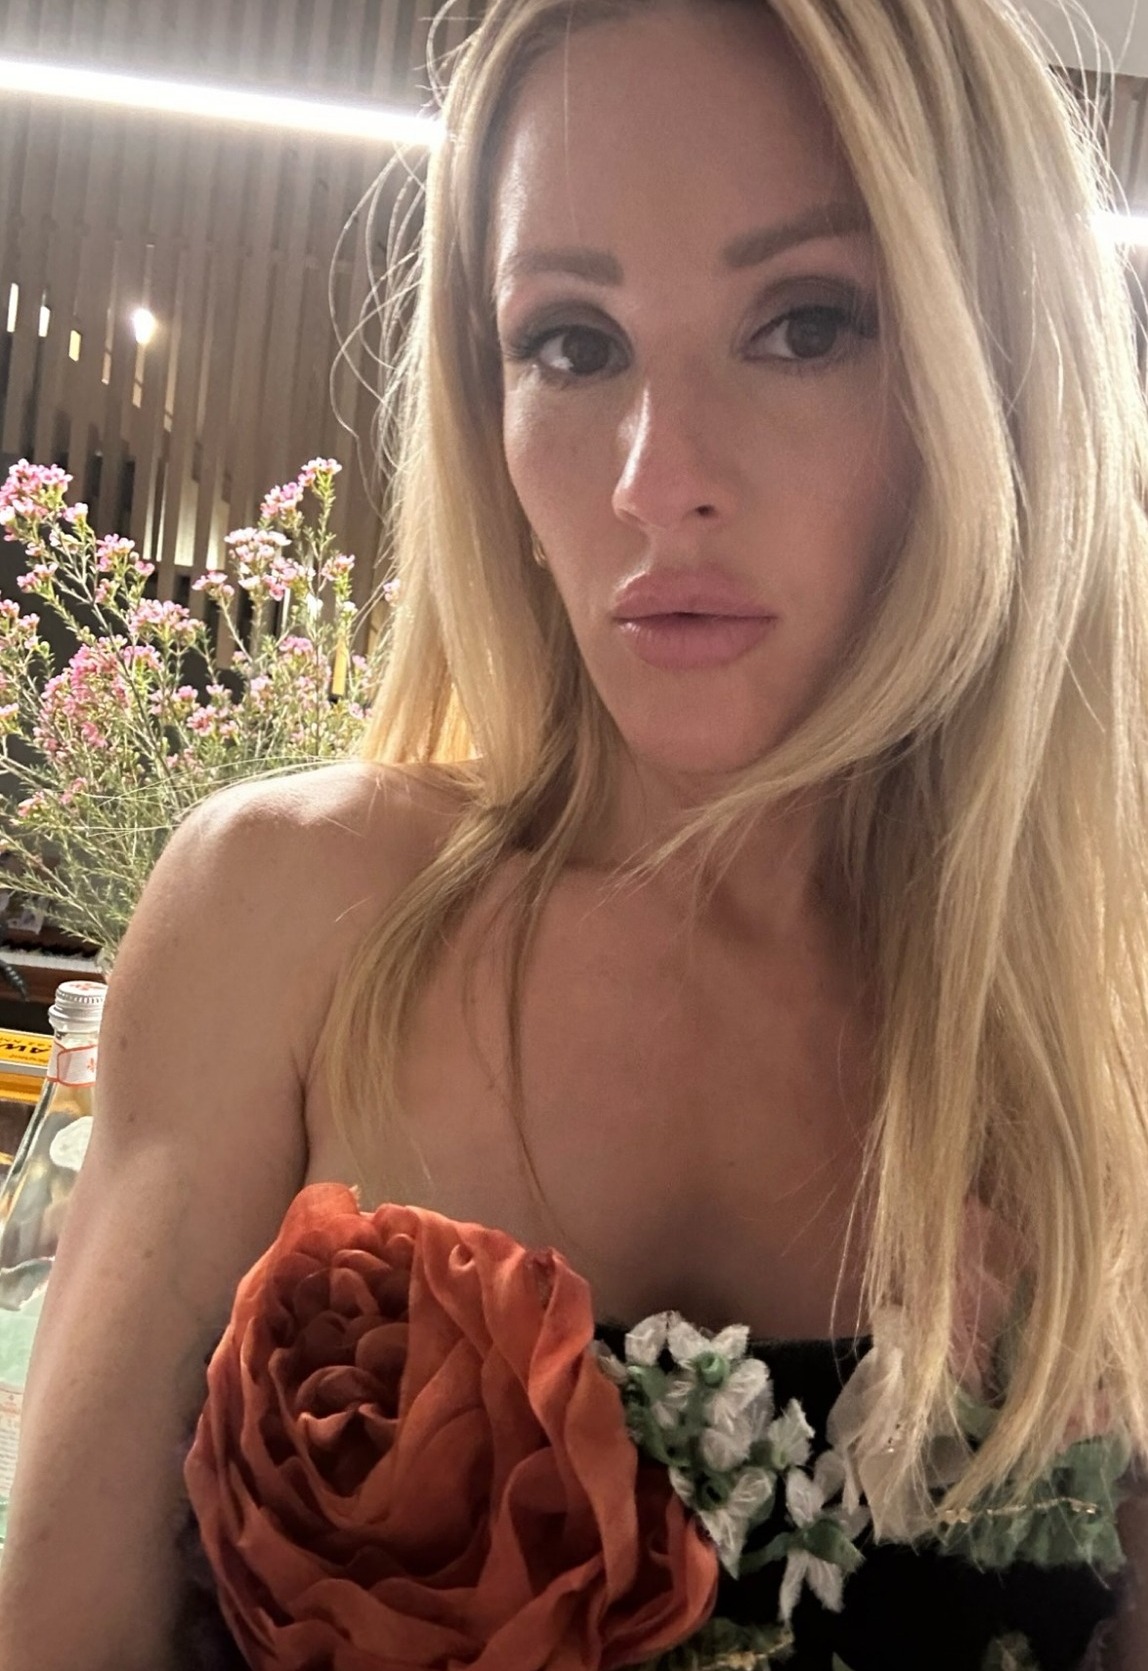 Ellie dressed in a glamorous floral dress in the evening